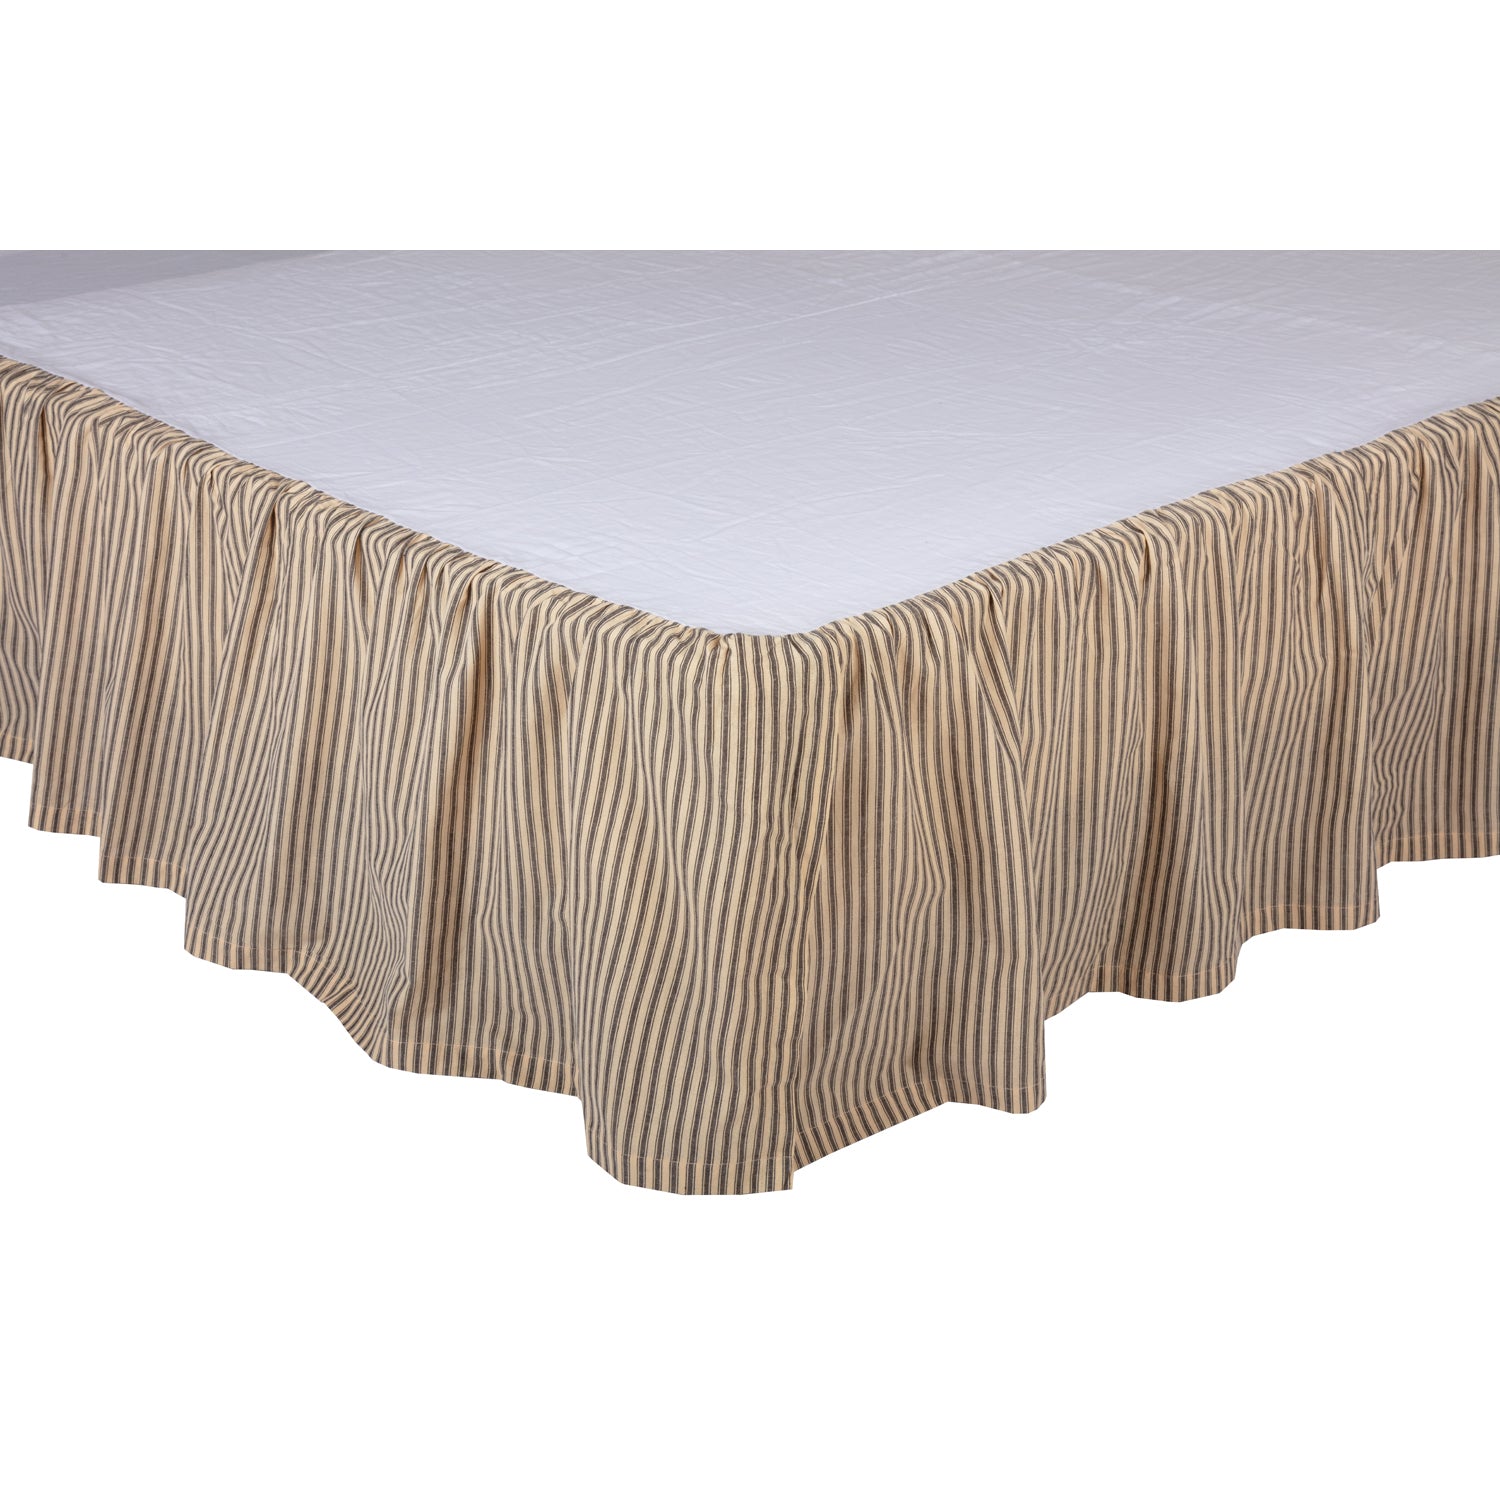 April & Olive Sawyer Mill Charcoal Ticking Stripe Queen Bed Skirt 60x80x16 By VHC Brands